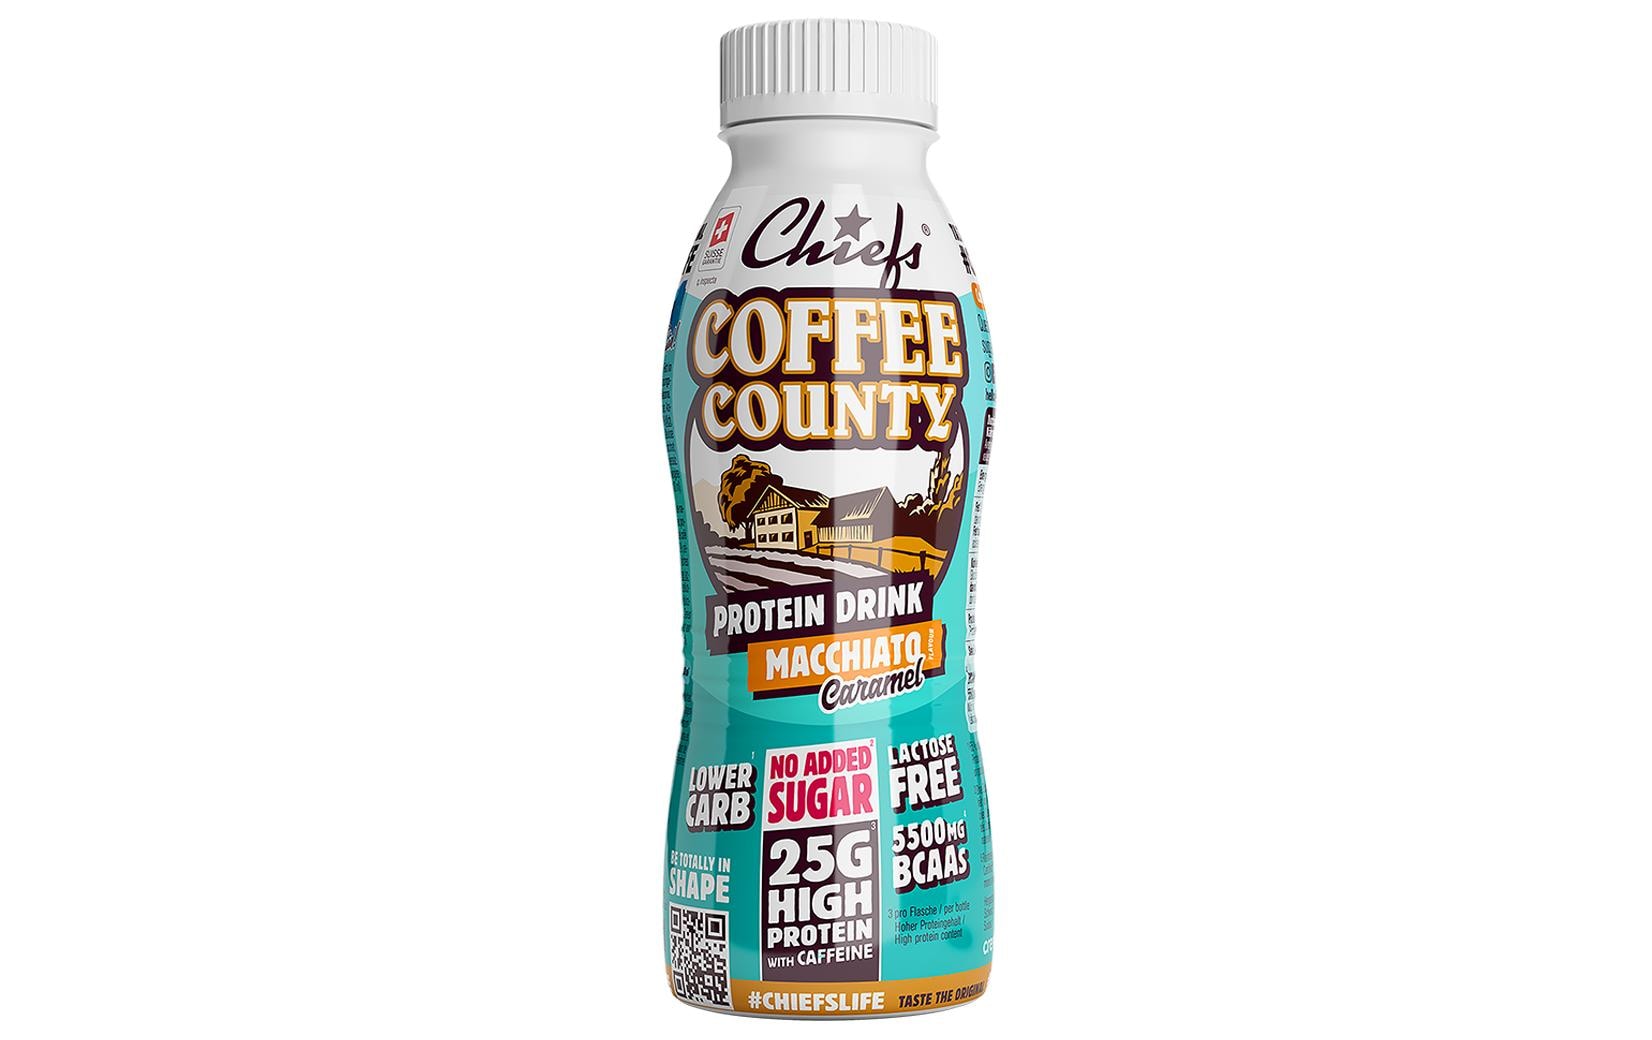 Chiefs Protein Drink Coffee County